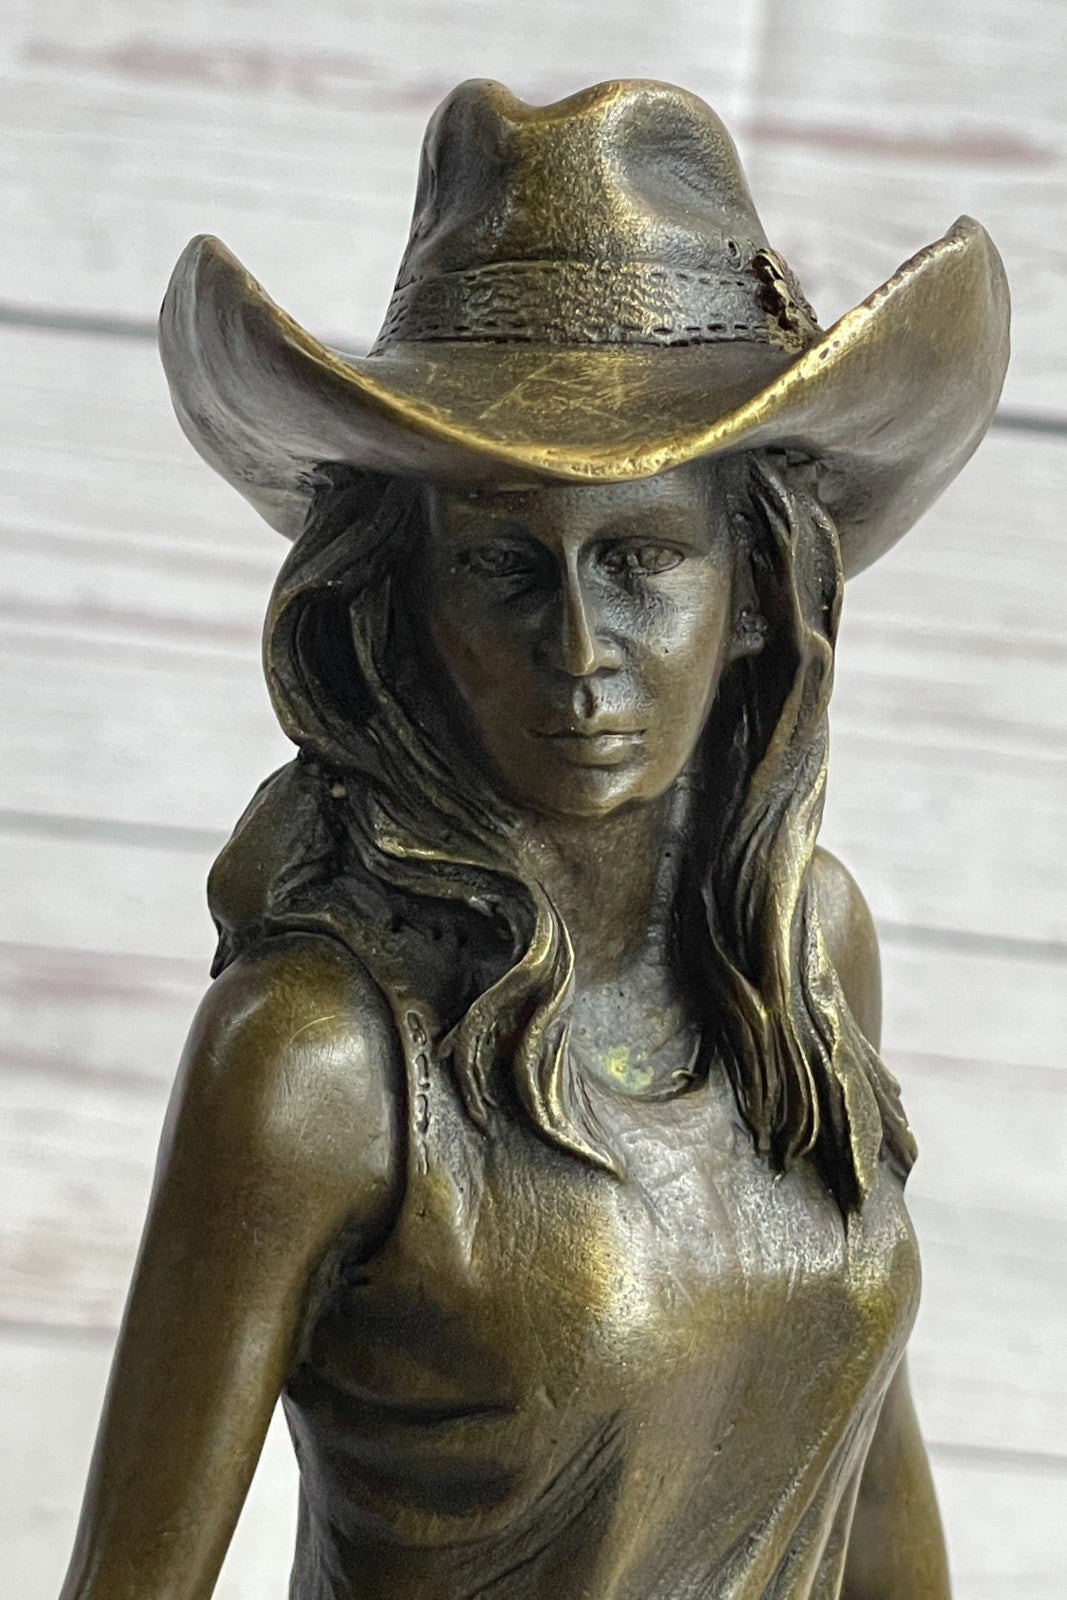 Handcrafted bronze sculpture SALE With Cowgirl Cast Hot Kamiko Signed Original